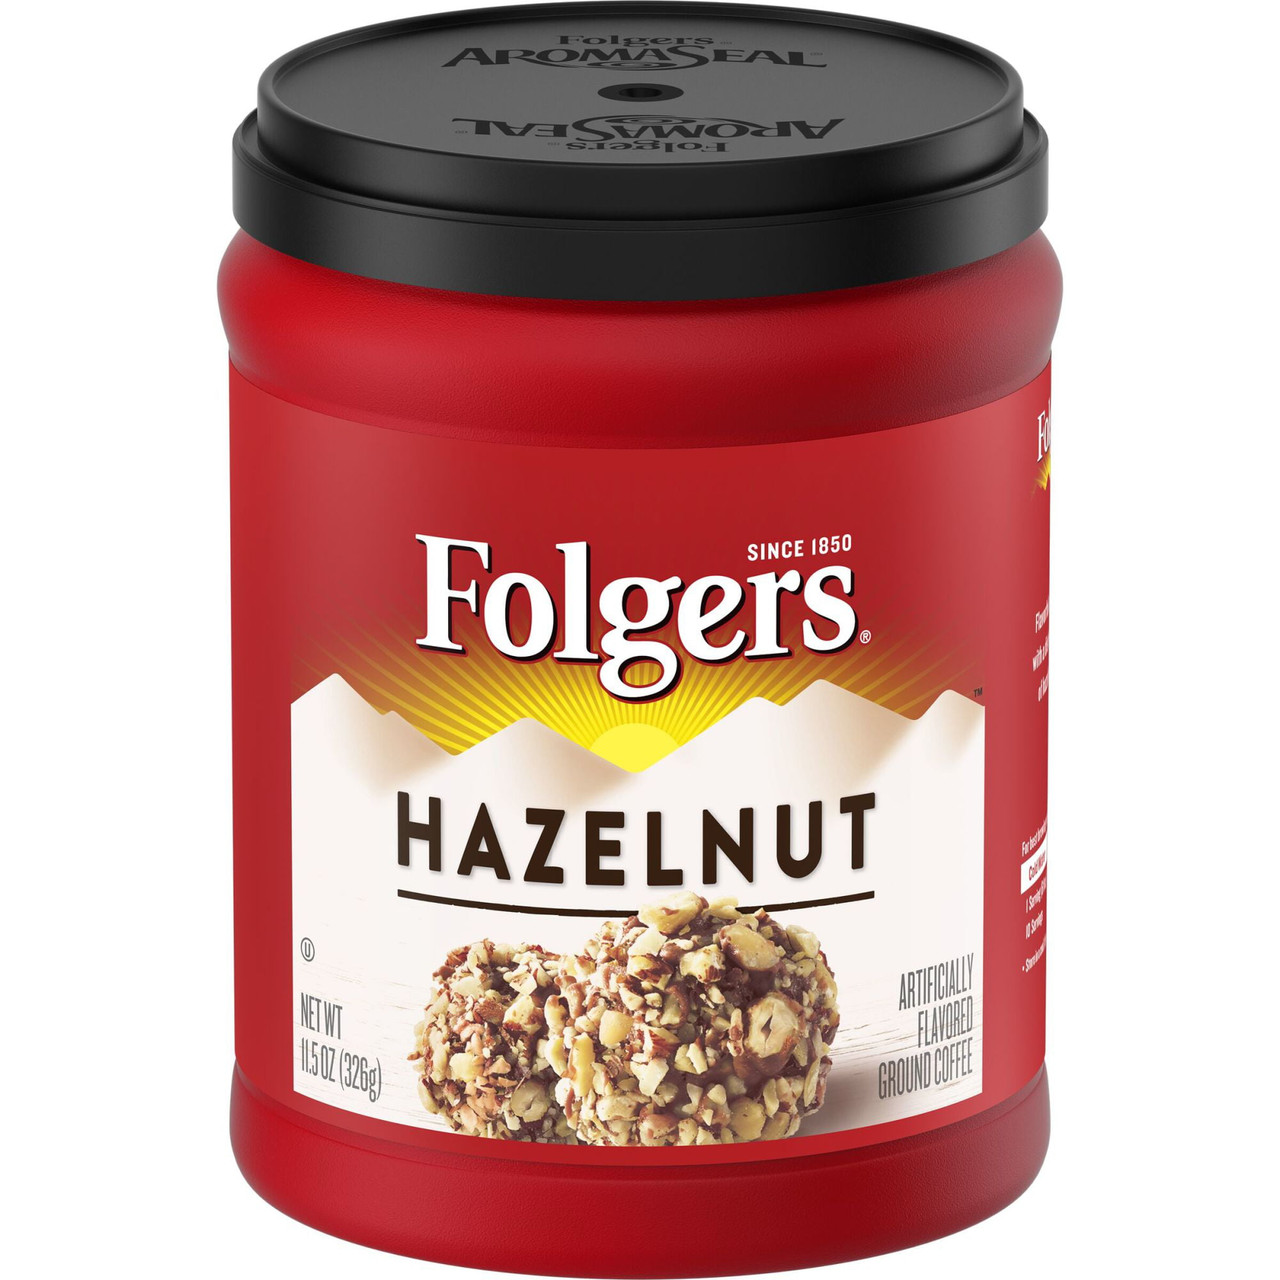 Folgers Hazelnut Ground Coffee, 11.5-Ounce - [From 23.00 - Choose pk Qty ] - *Ships from Miami